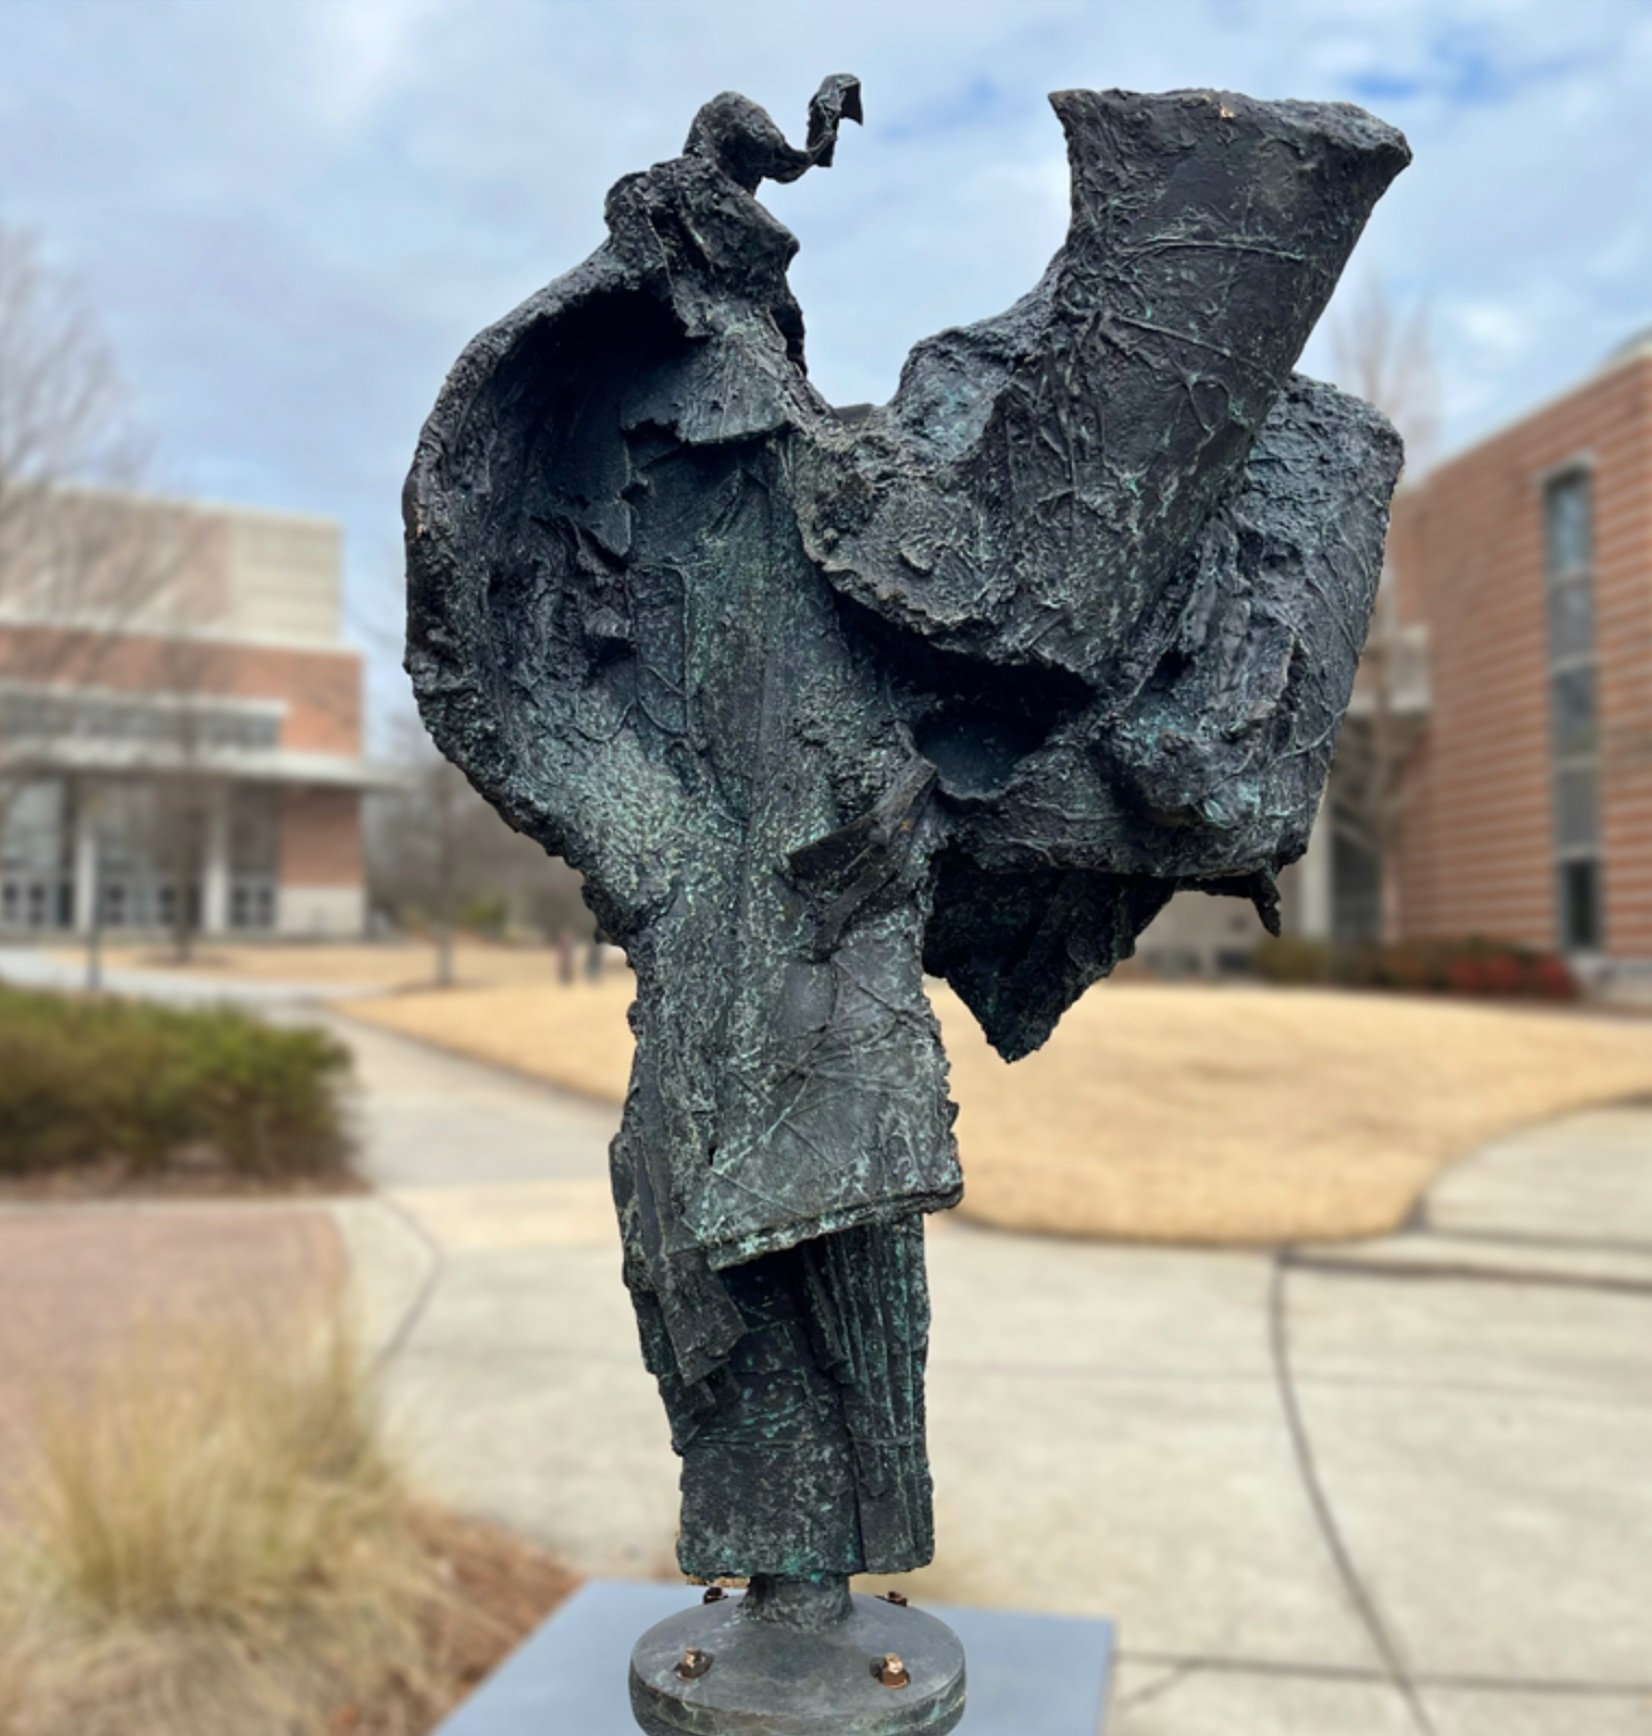  Archangel, 1967, aluminum and fiberglass on stone, 87 in. x 49 in. x 33 in, Winner of the first award, Southern Association of Sculptors  